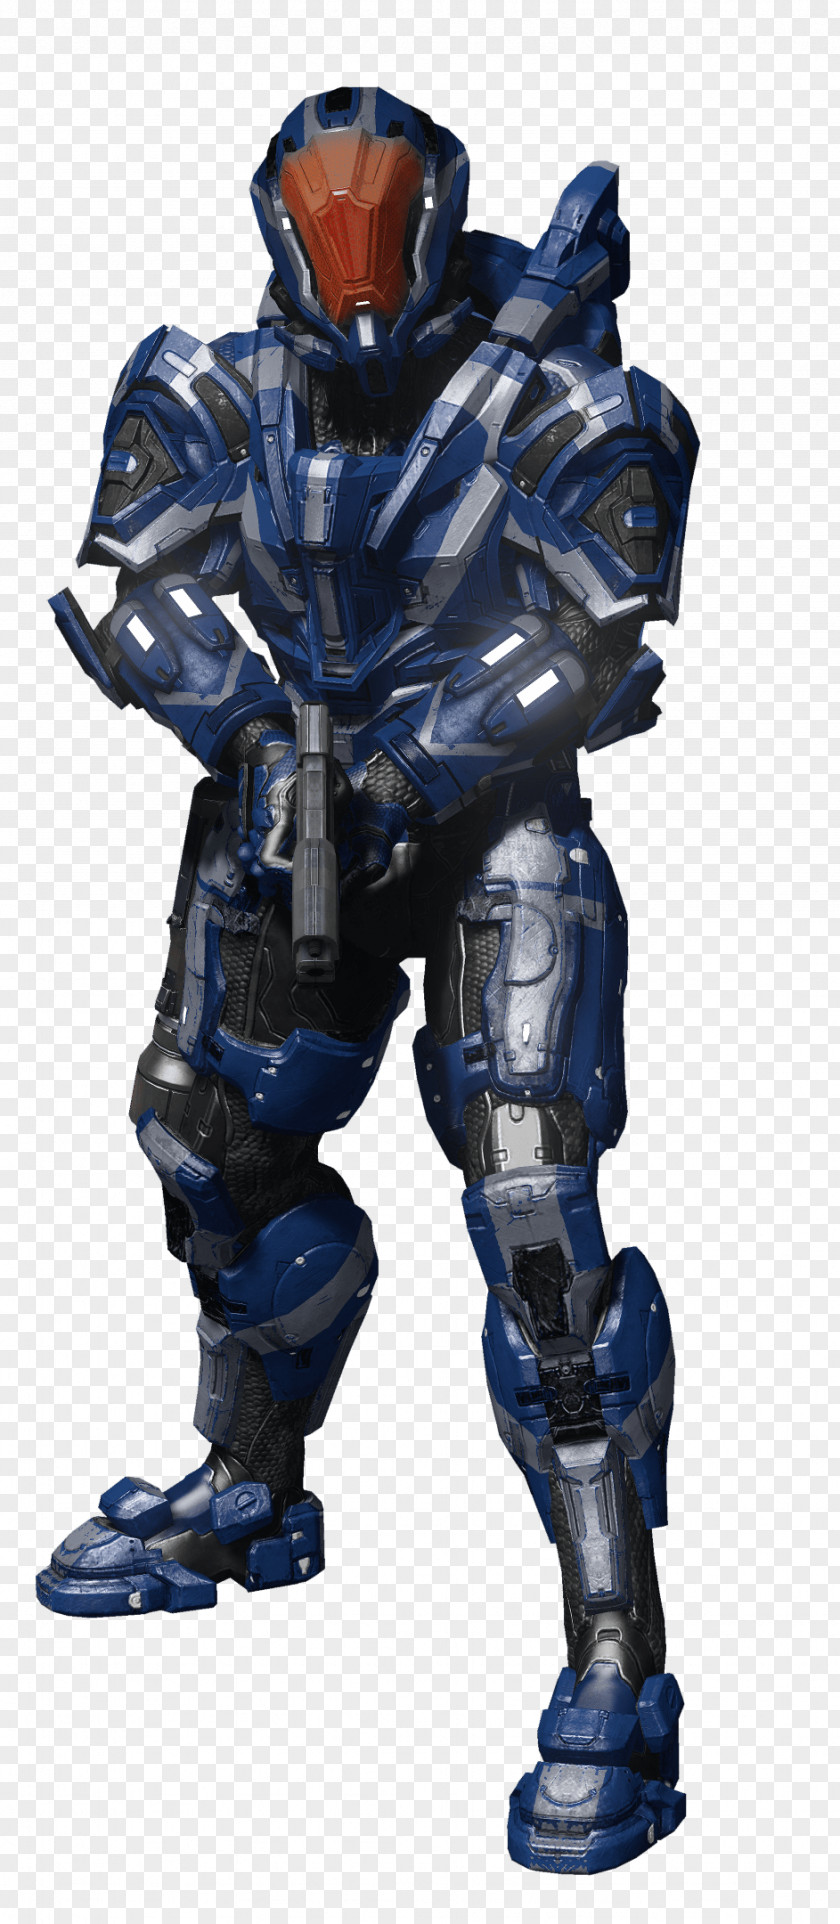 Halo 4 Halo: Reach Combat Evolved 3 Spartan PNG